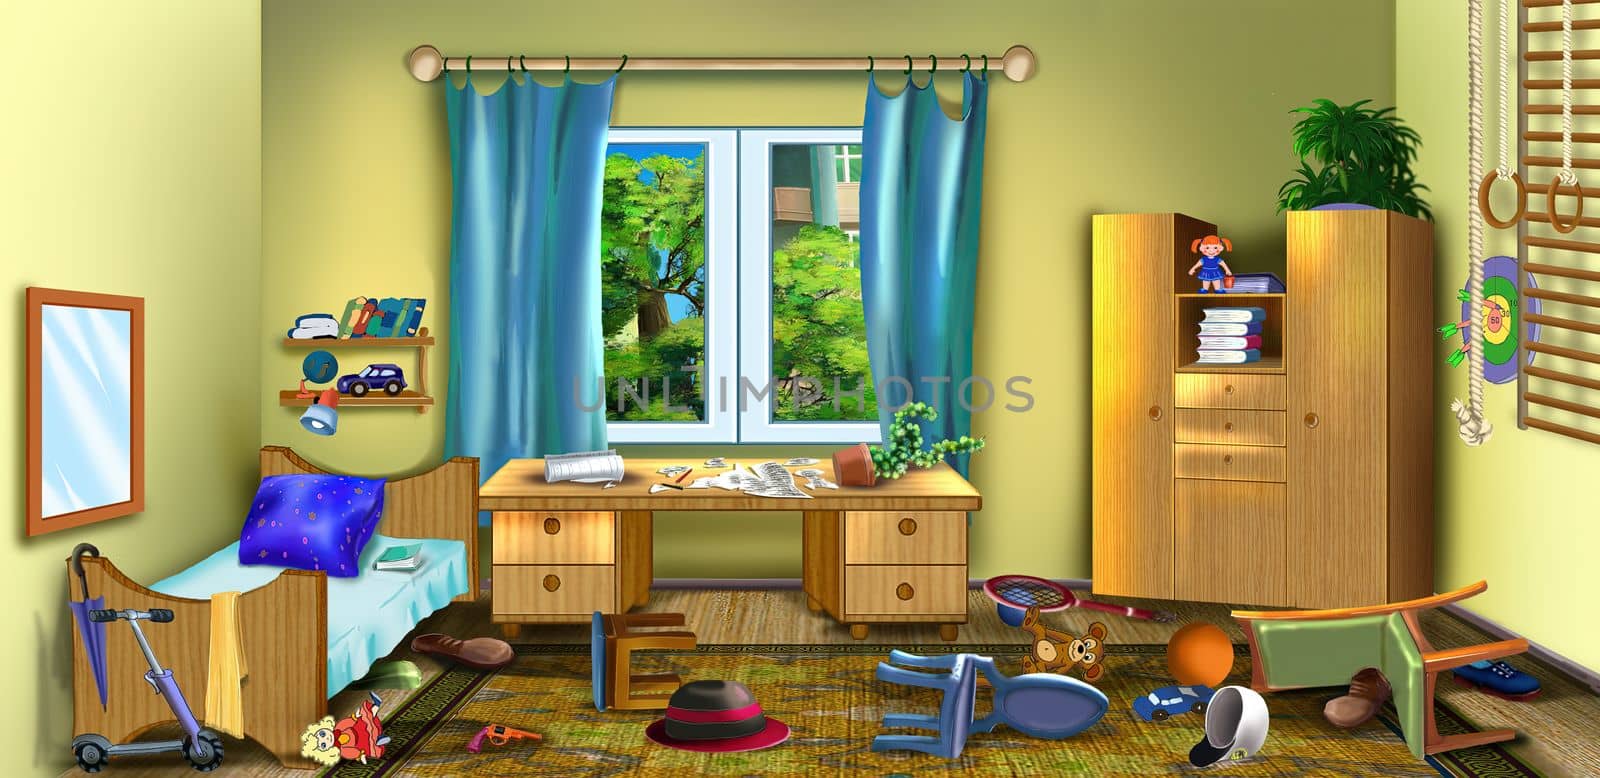 Mess in the child's room on a summer day. Digital Painting Background, Illustration.